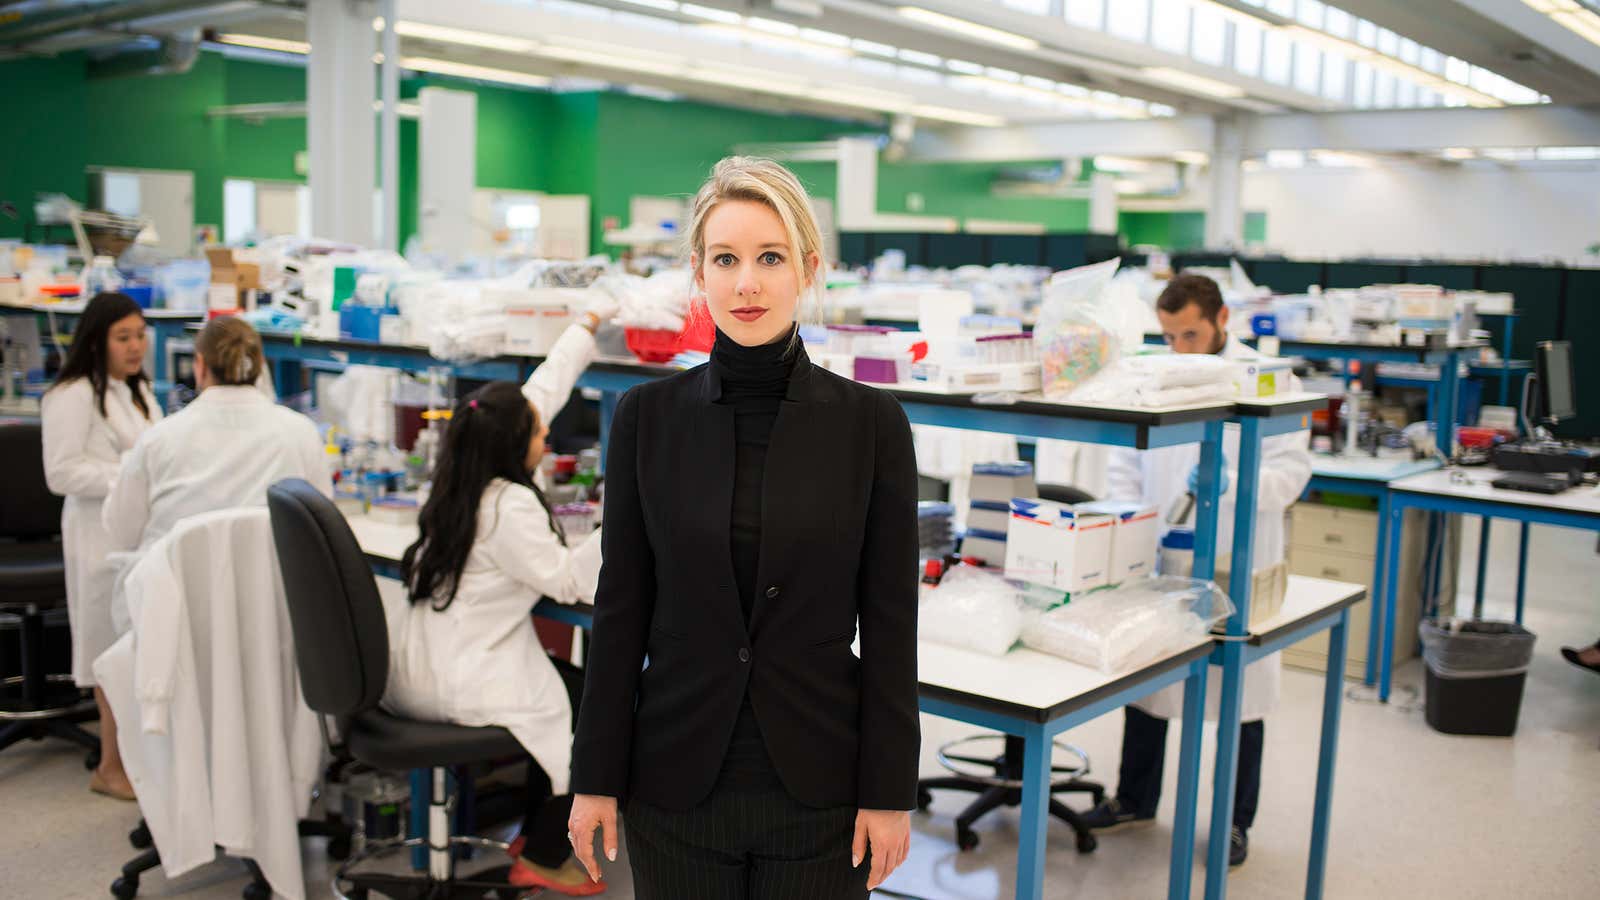 HBO’s documentary “The Inventor” asks viewers if they can decipher what’s behind the cultivated persona of Elizabeth Holmes.